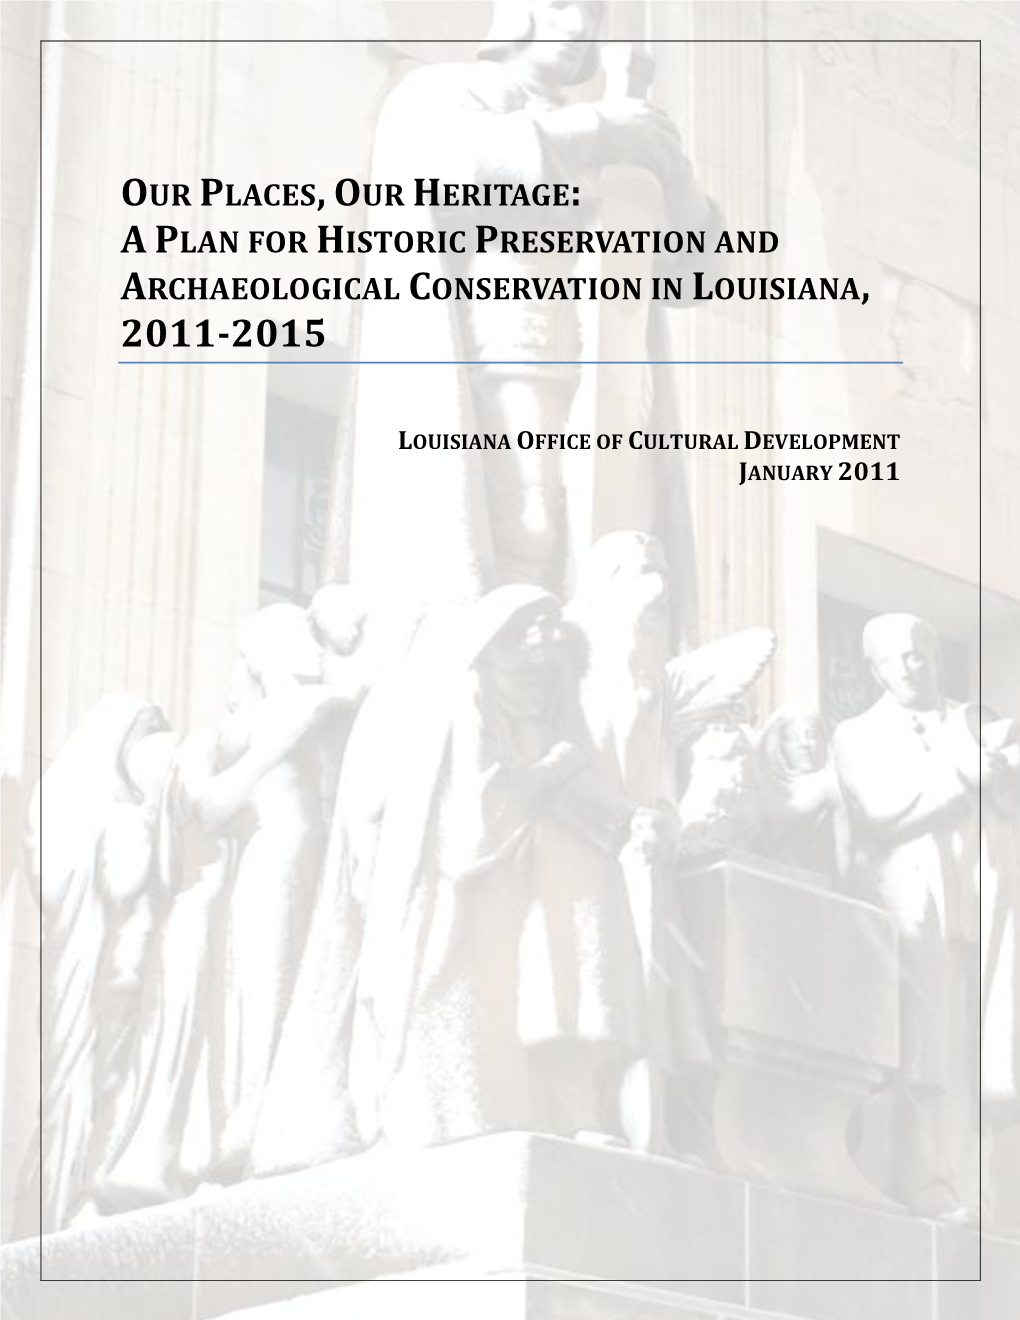 Our Places, Our Heritage: a Plan for Historic Preservation and Archaeological Conservation in Louisiana, 2011-2015